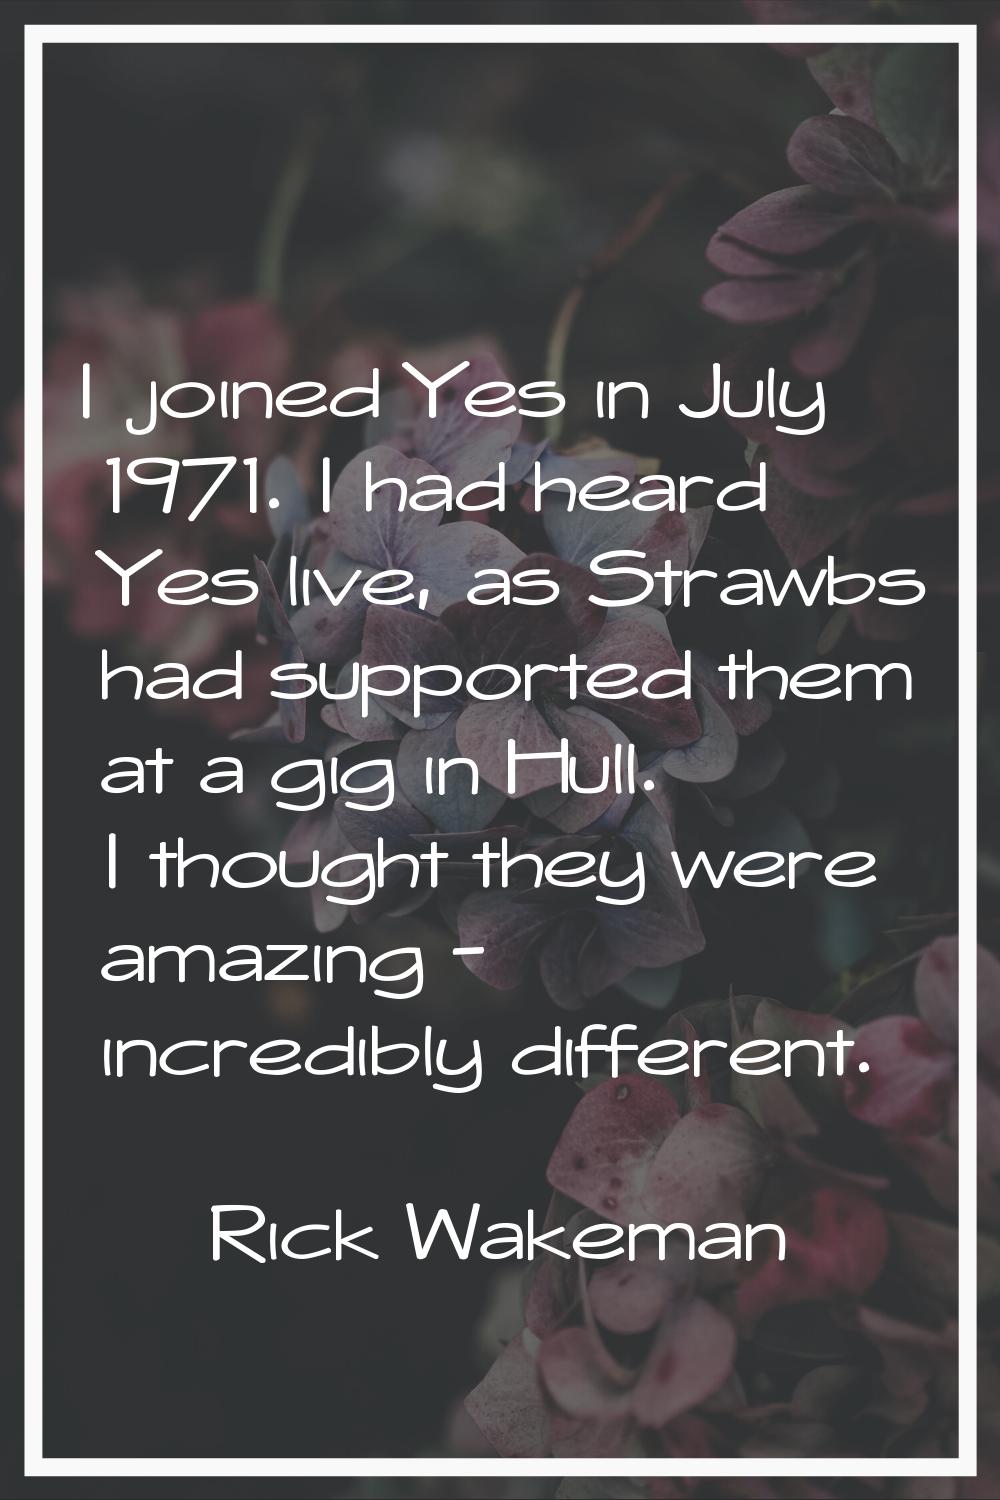 I joined Yes in July 1971. I had heard Yes live, as Strawbs had supported them at a gig in Hull. I 